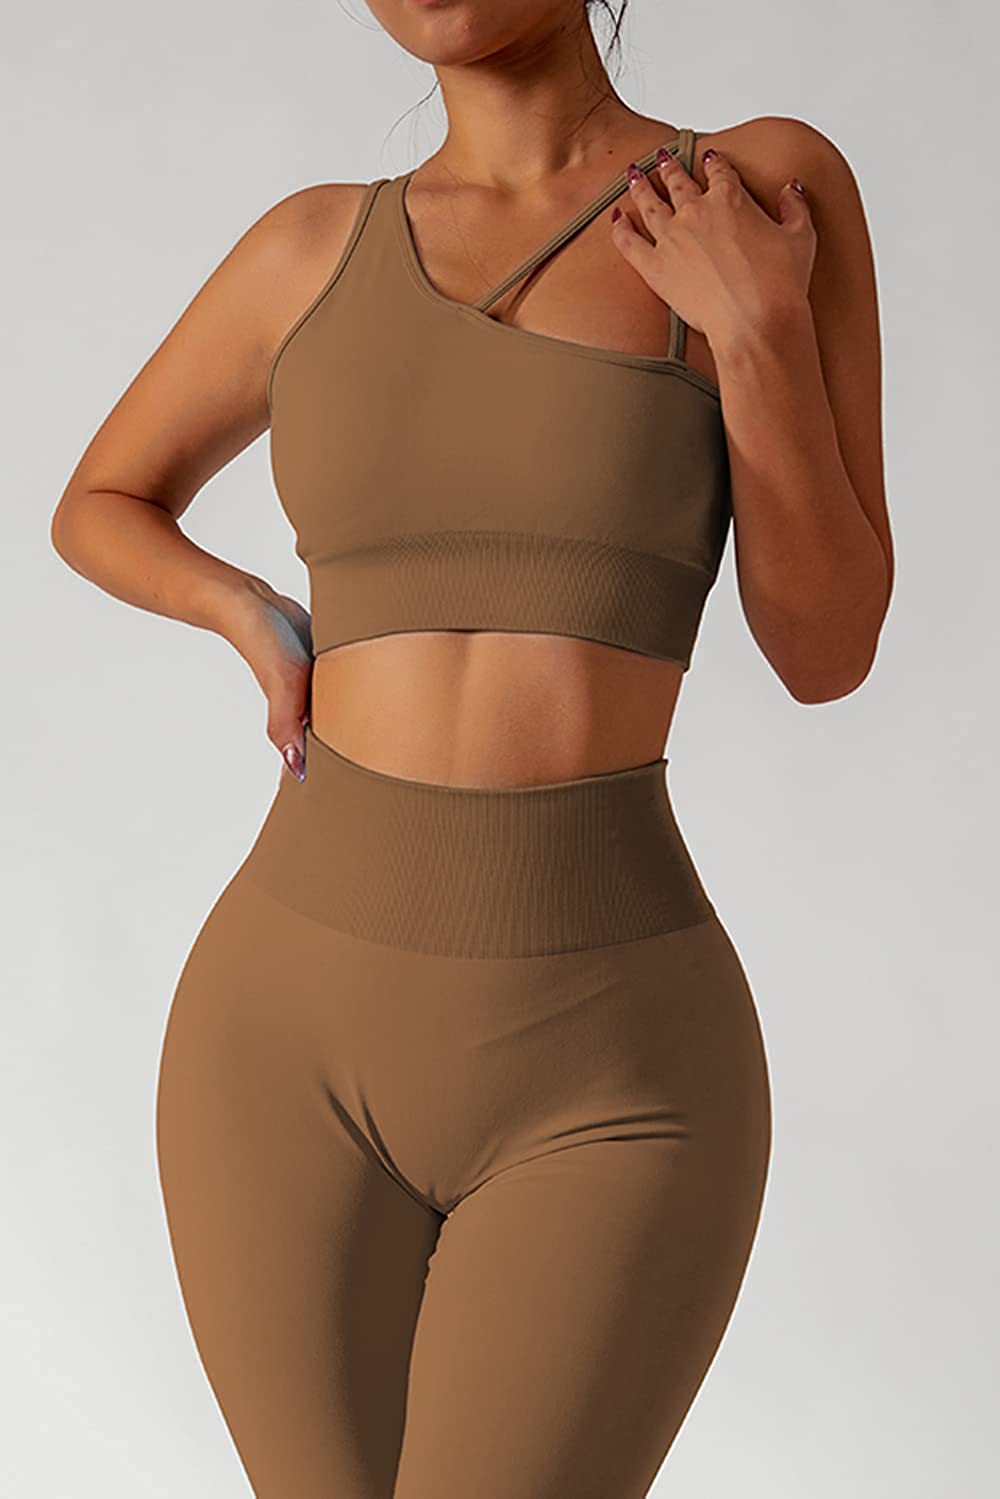 Workout Outfits for Women 2 Piece Seamless Long Sleeve Crop Tops and High  Waist Yoga Leggings Exercise Sets - Walmart.com